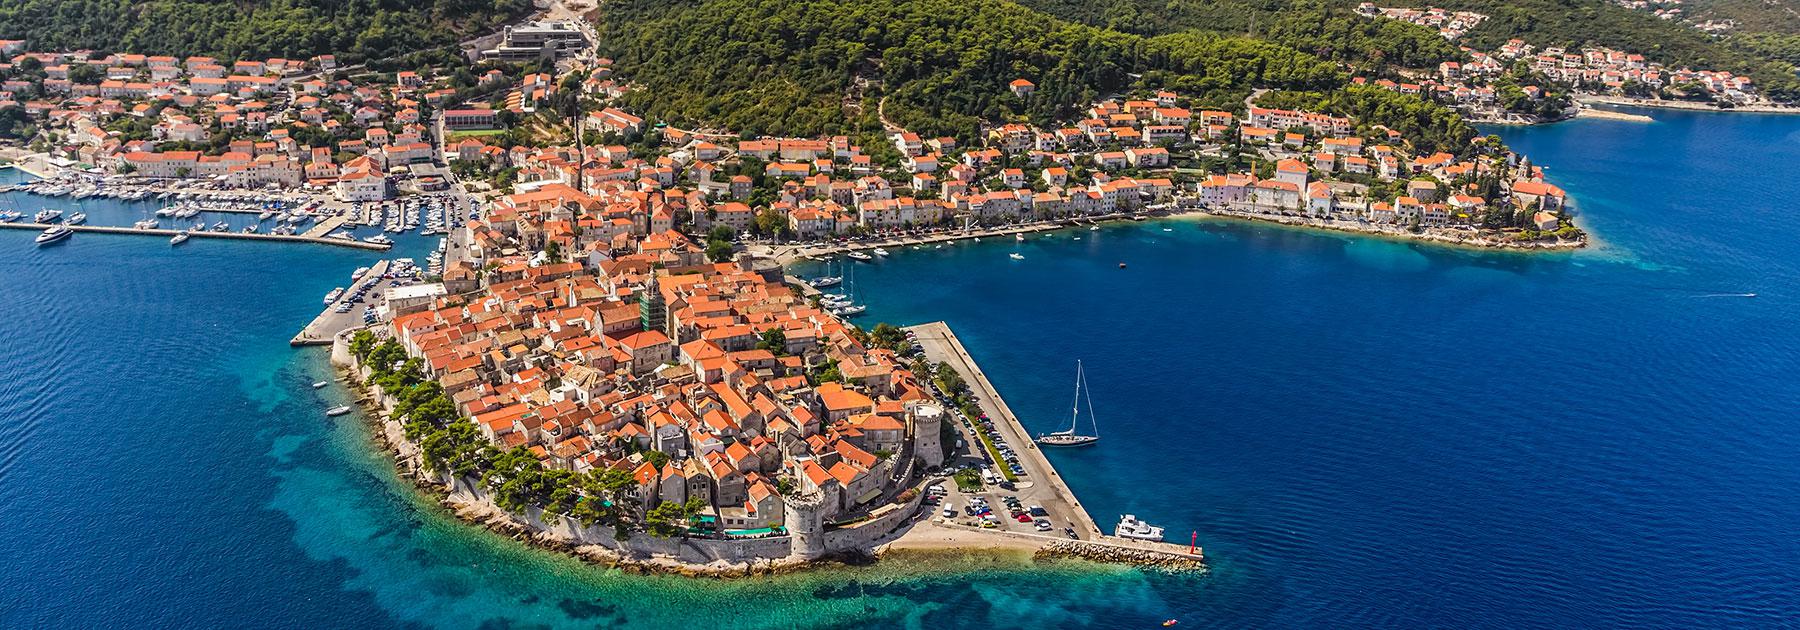 Croatia & Slovenia Itinerary | Group Vacation Suggestion with Airfare